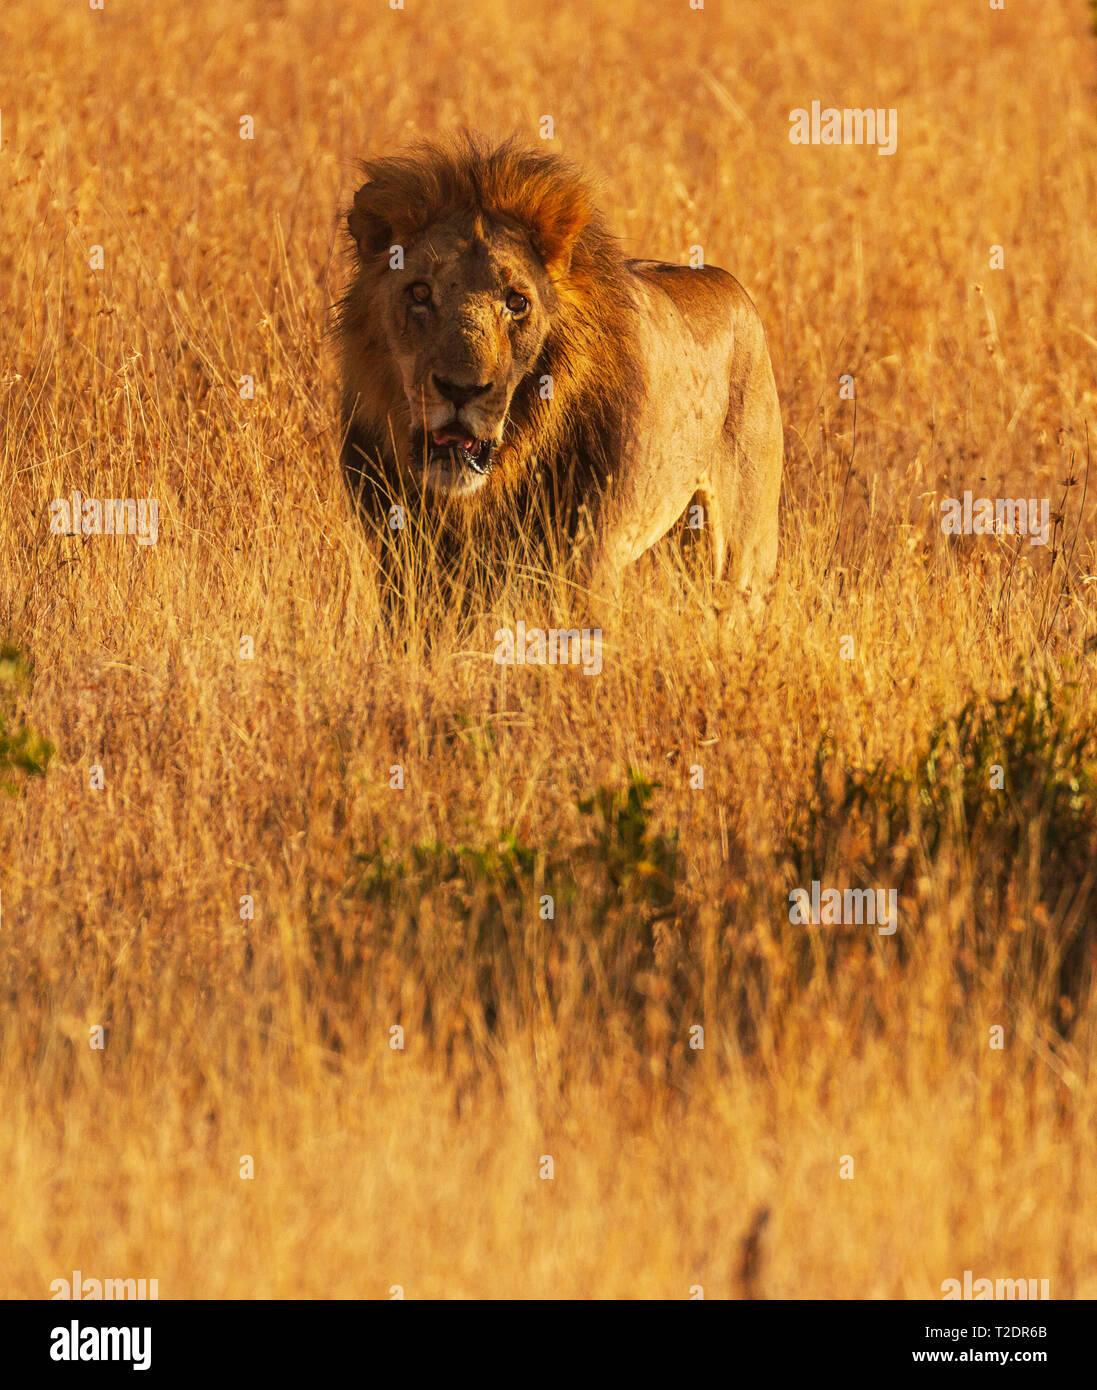 Male lion, panthera leo, large mane camouflaged in tall yellow grass. Ol Pejeta Conservancy, Kenya, East Africa. Vertical copy space Stock Photo